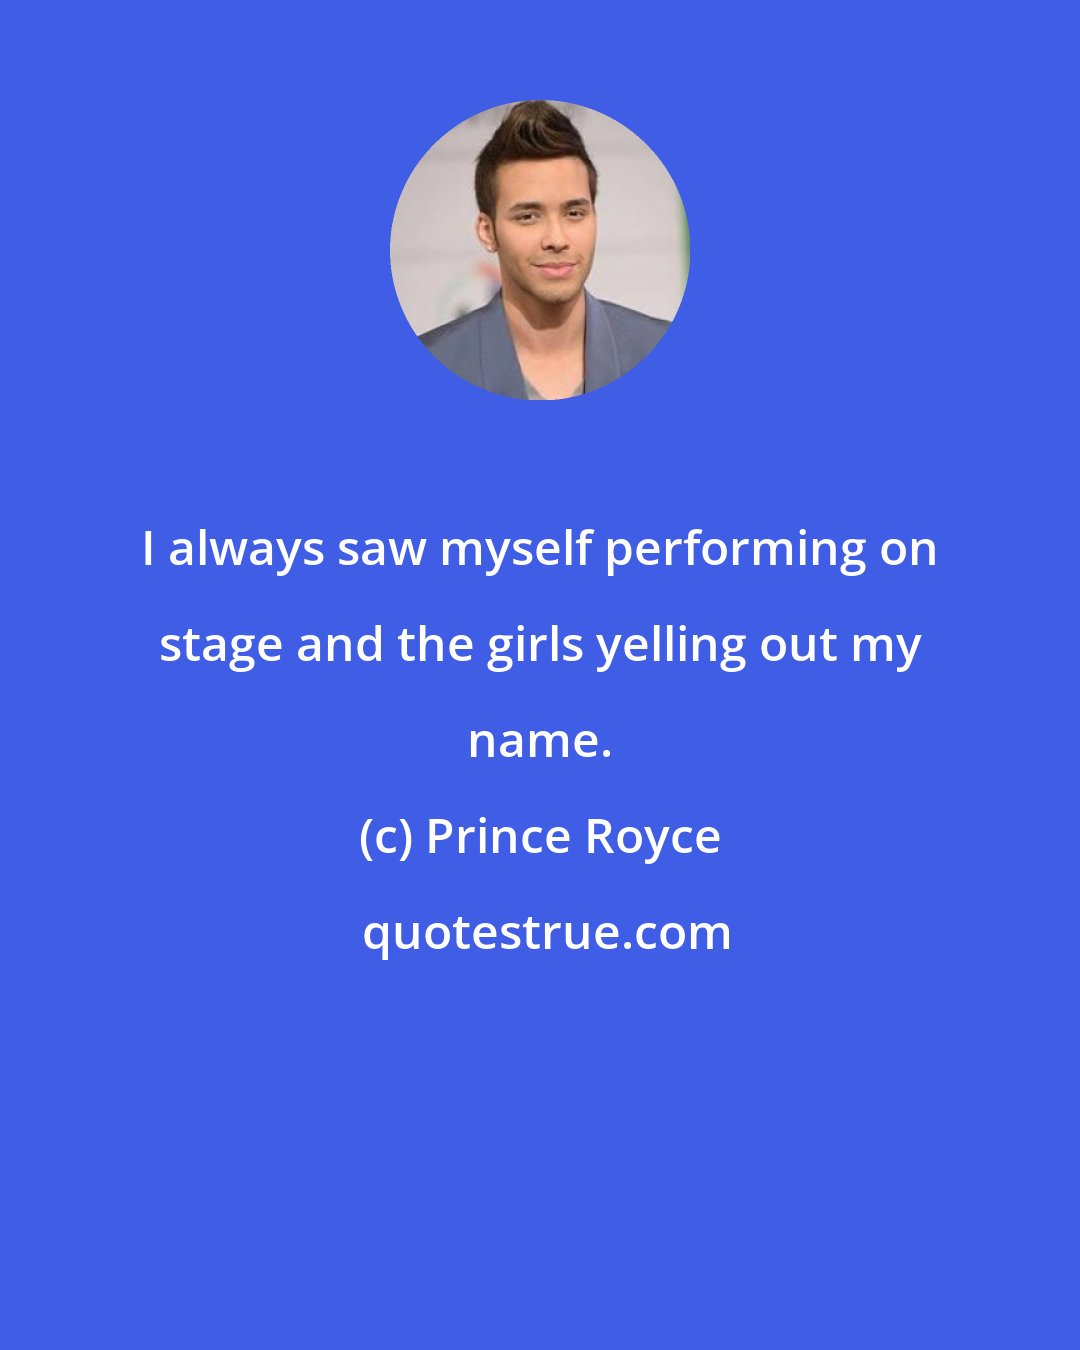 Prince Royce: I always saw myself performing on stage and the girls yelling out my name.